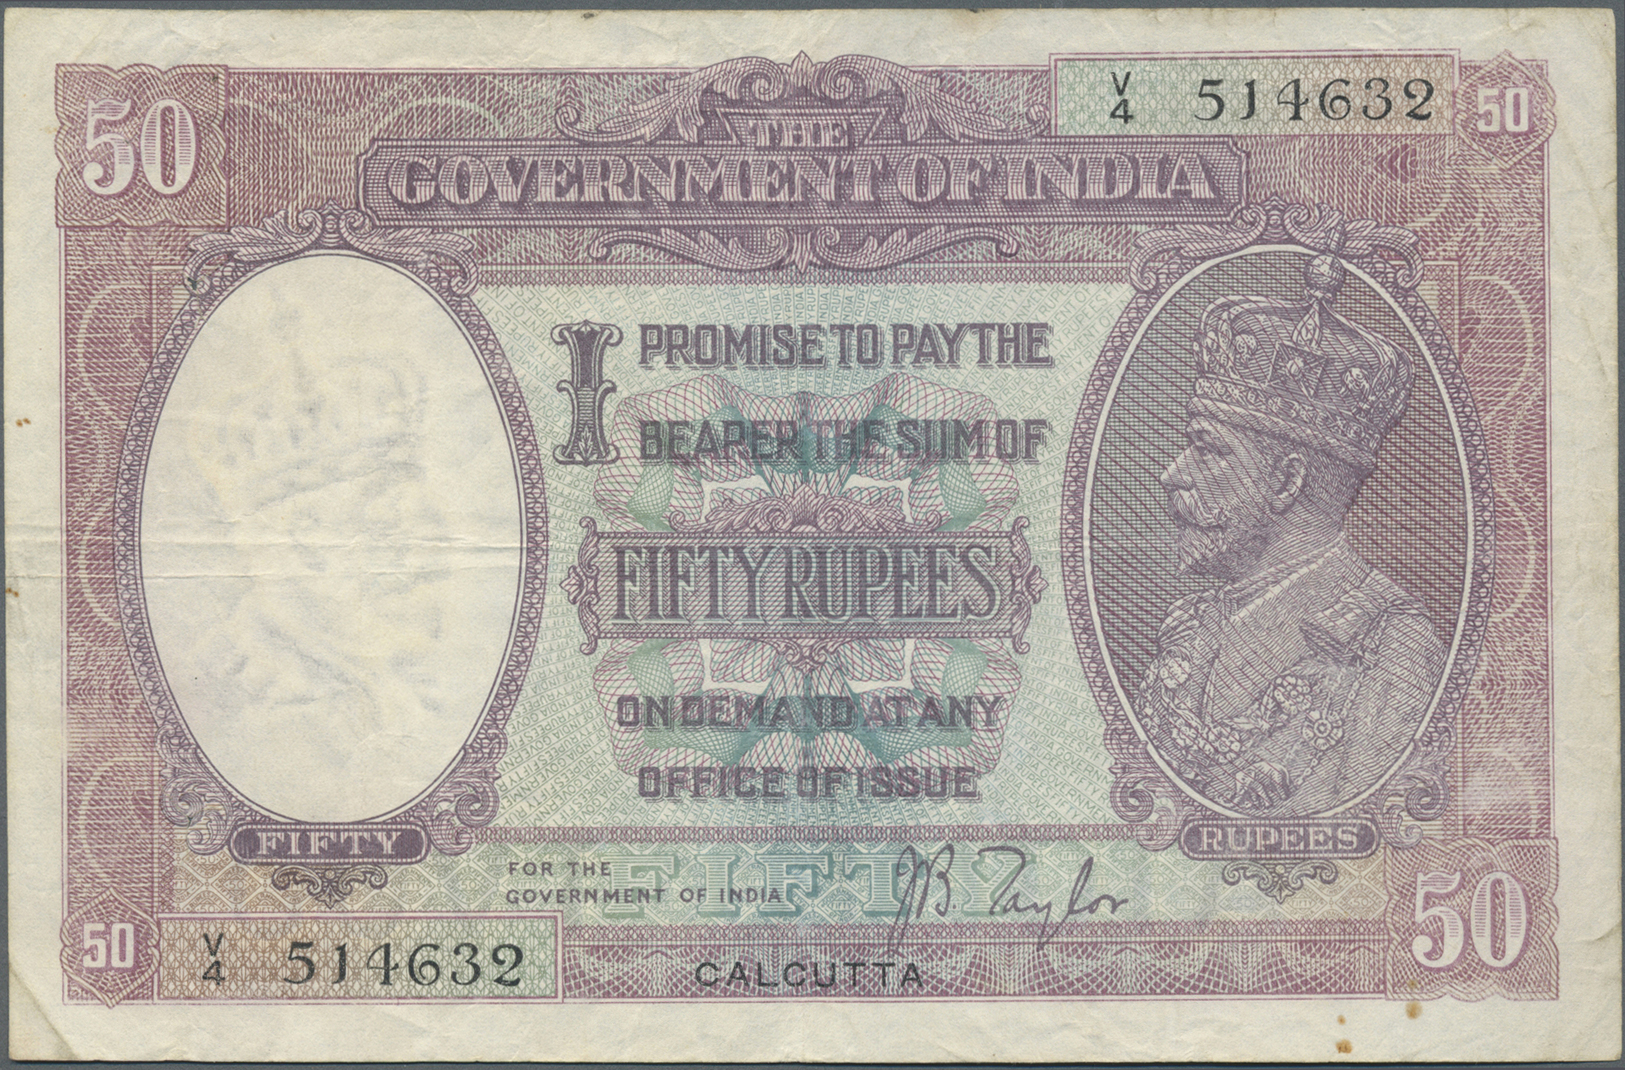 01075 India / Indien: 50 Rupees ND(1930) P. 9d, Sign Taylor, Issue For CALCUTTA, Used With Folds And Creases, A Few Pinh - India